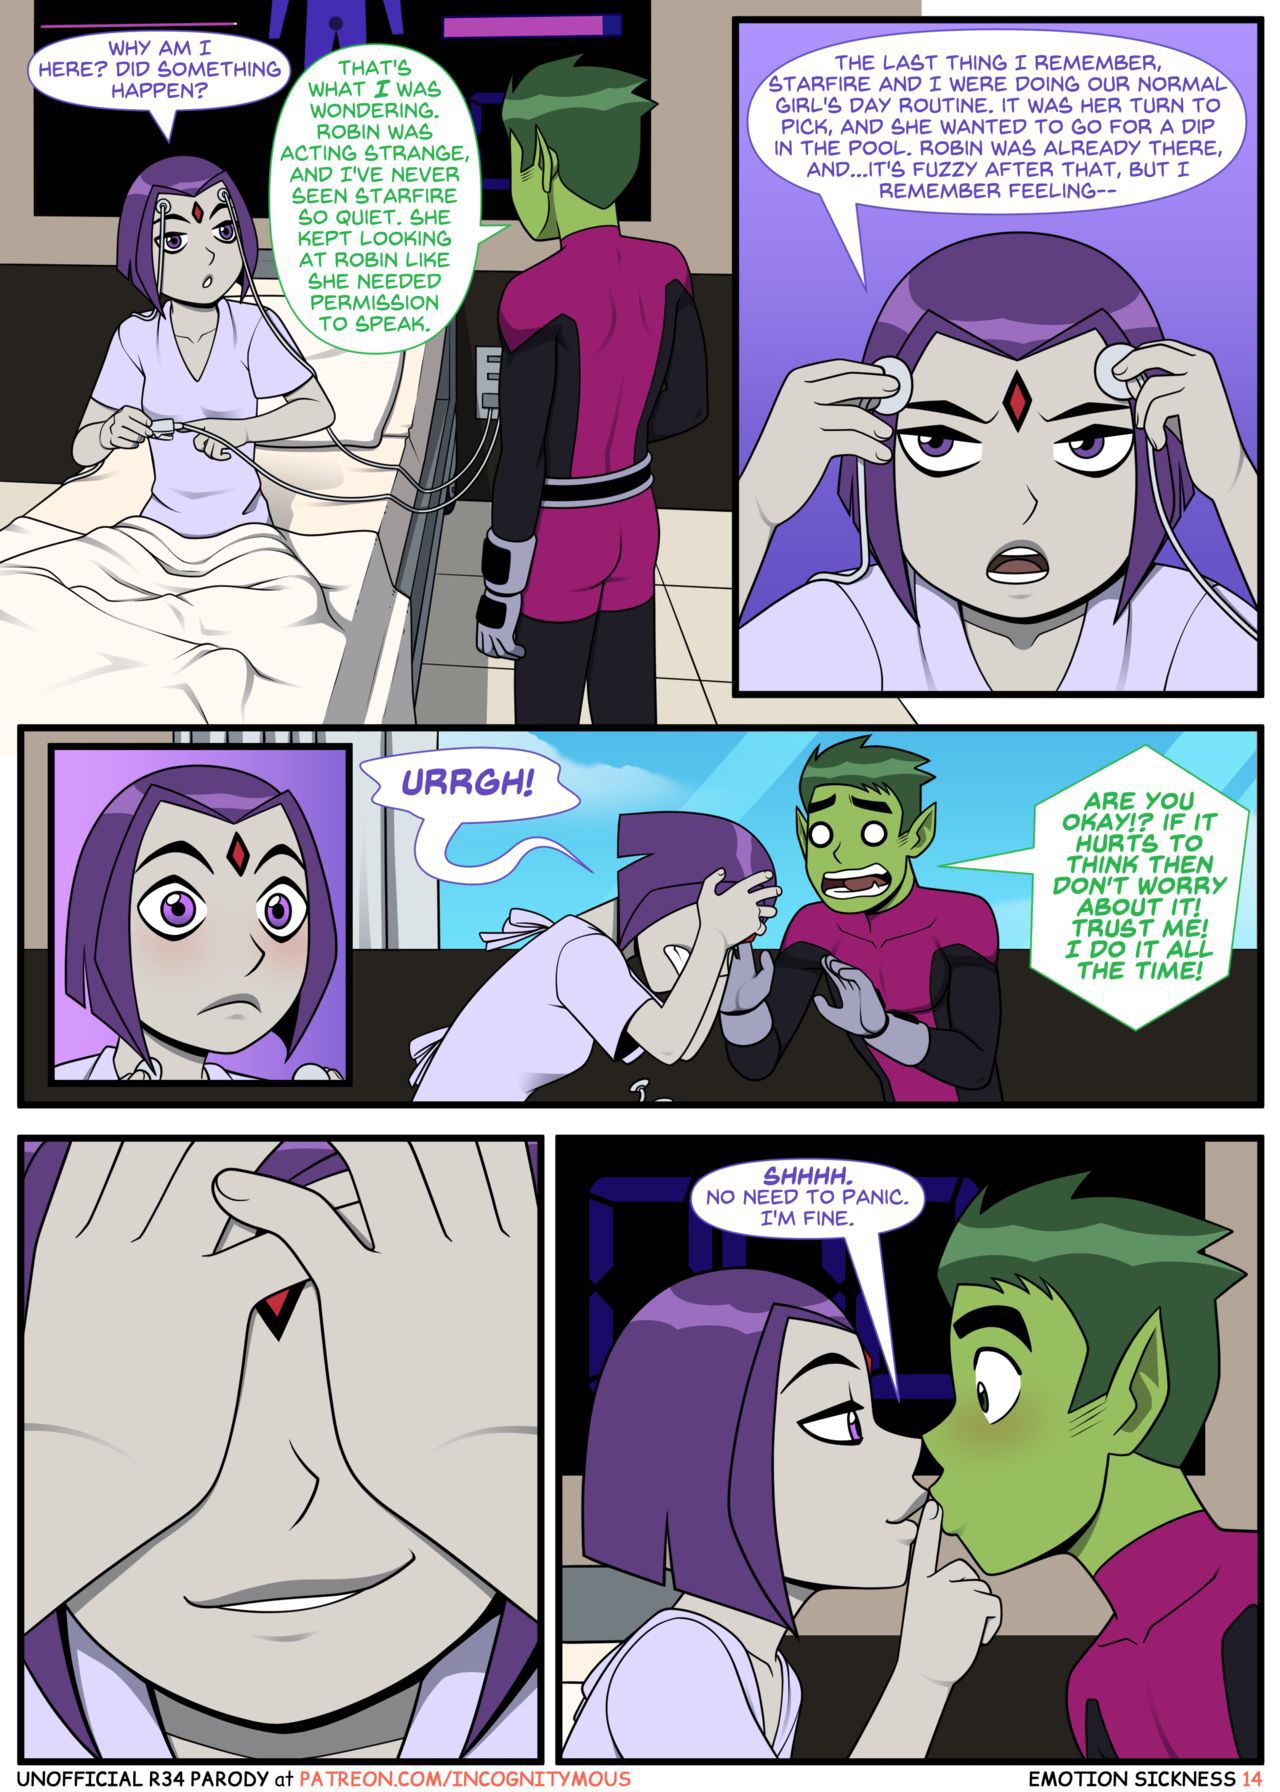 (Incognitymous) Teen Titans - Emotion Sickness(ongoing) 14